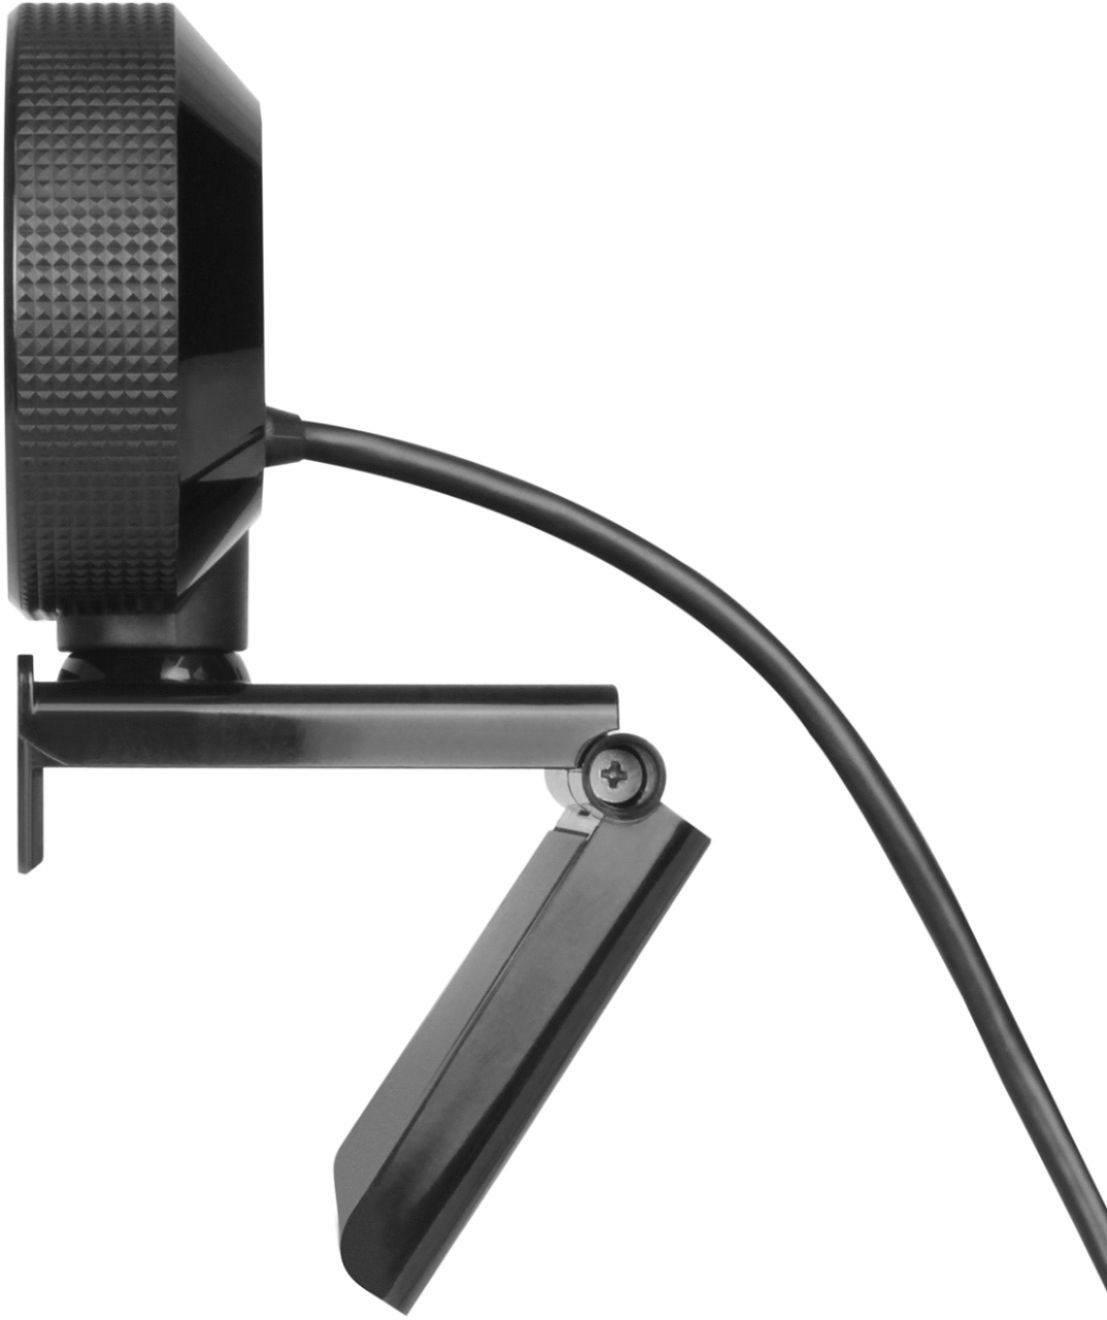 Left View: Aluratek - LIVE 1080 HD Webcam with Ring Light, Auto Focus and Directional Noise Cancelling Mic - Black